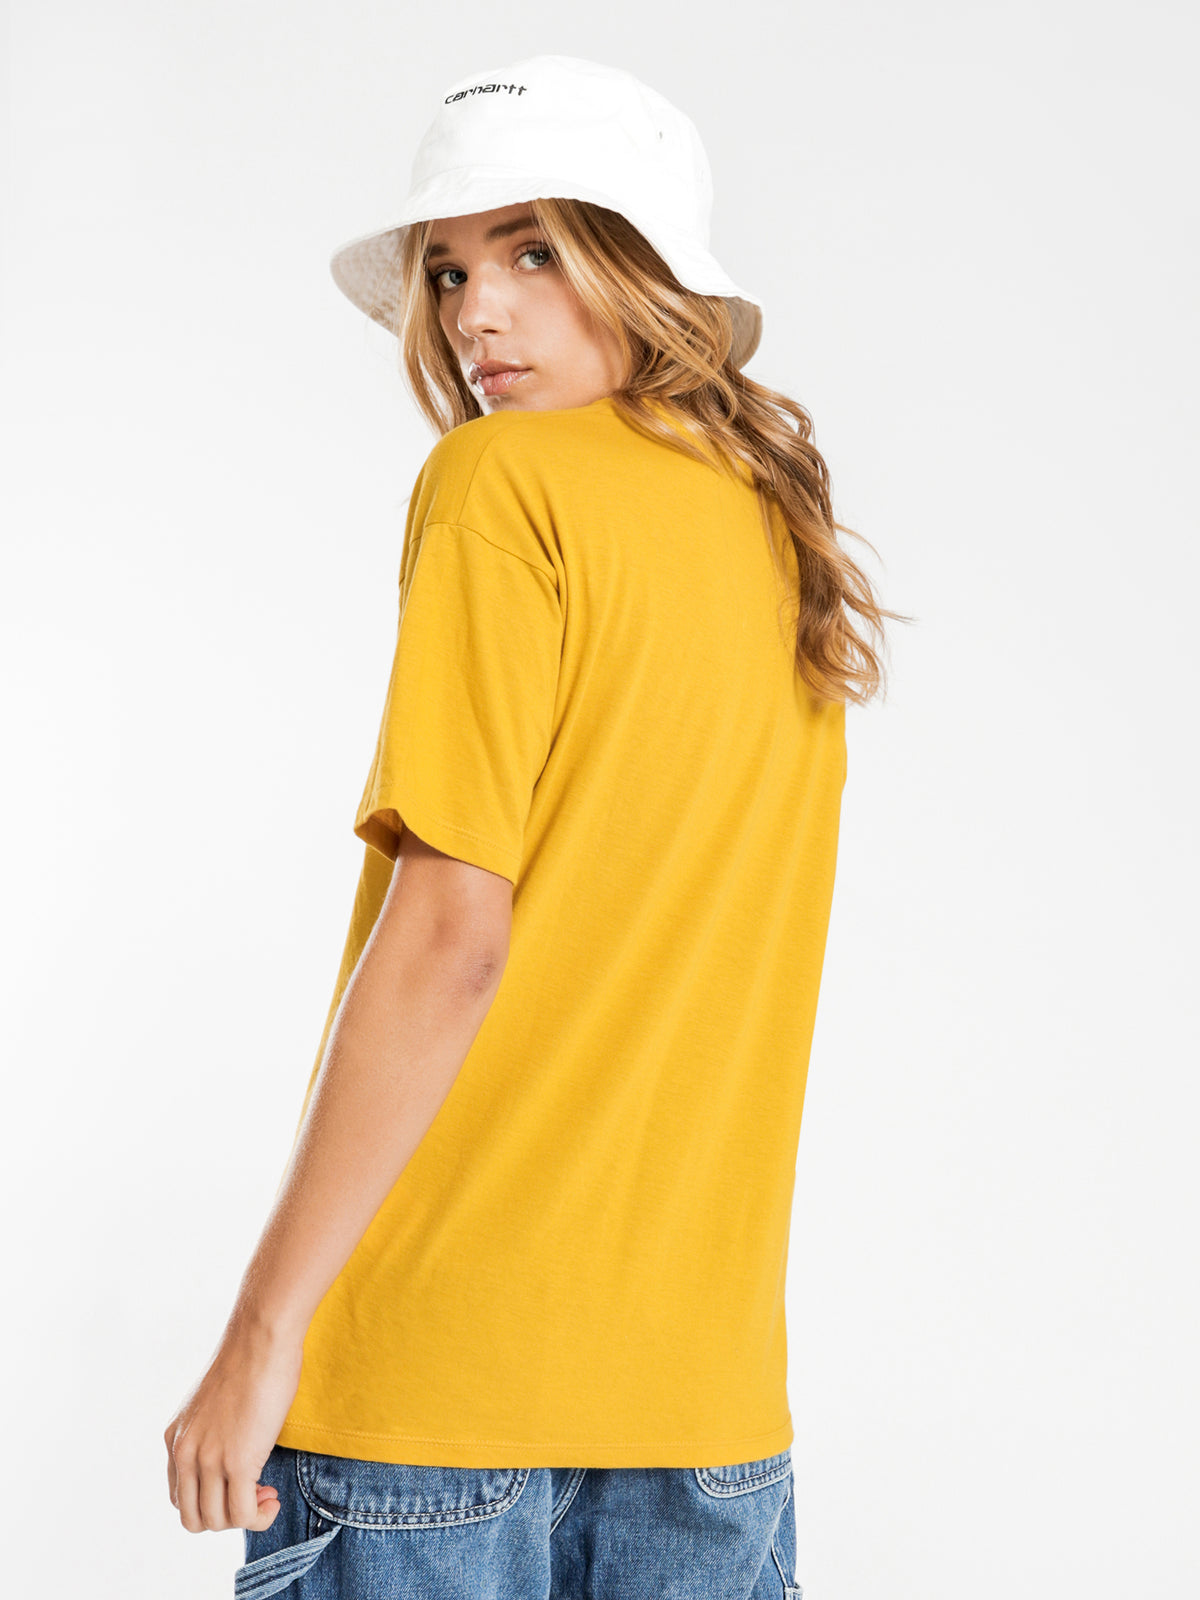 Carrie Short Sleeve Pocket T-Shirt in Yellow